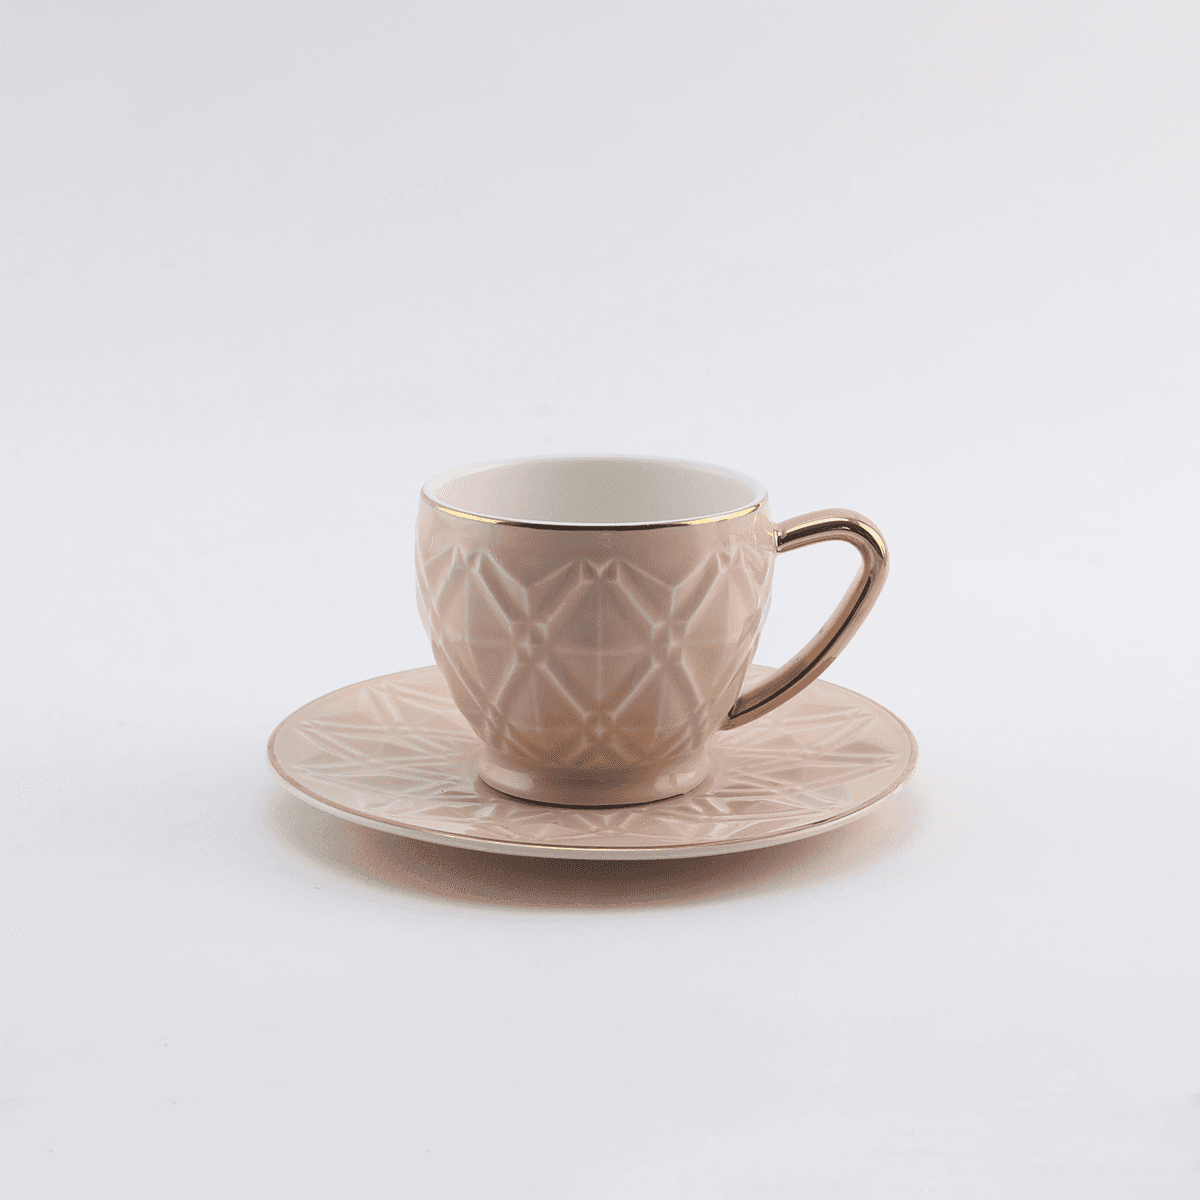 Rose Porcelain Coffee Cup and Saucer 12 Pieces Set White 80 ml RS-1717 Pink Porcelain